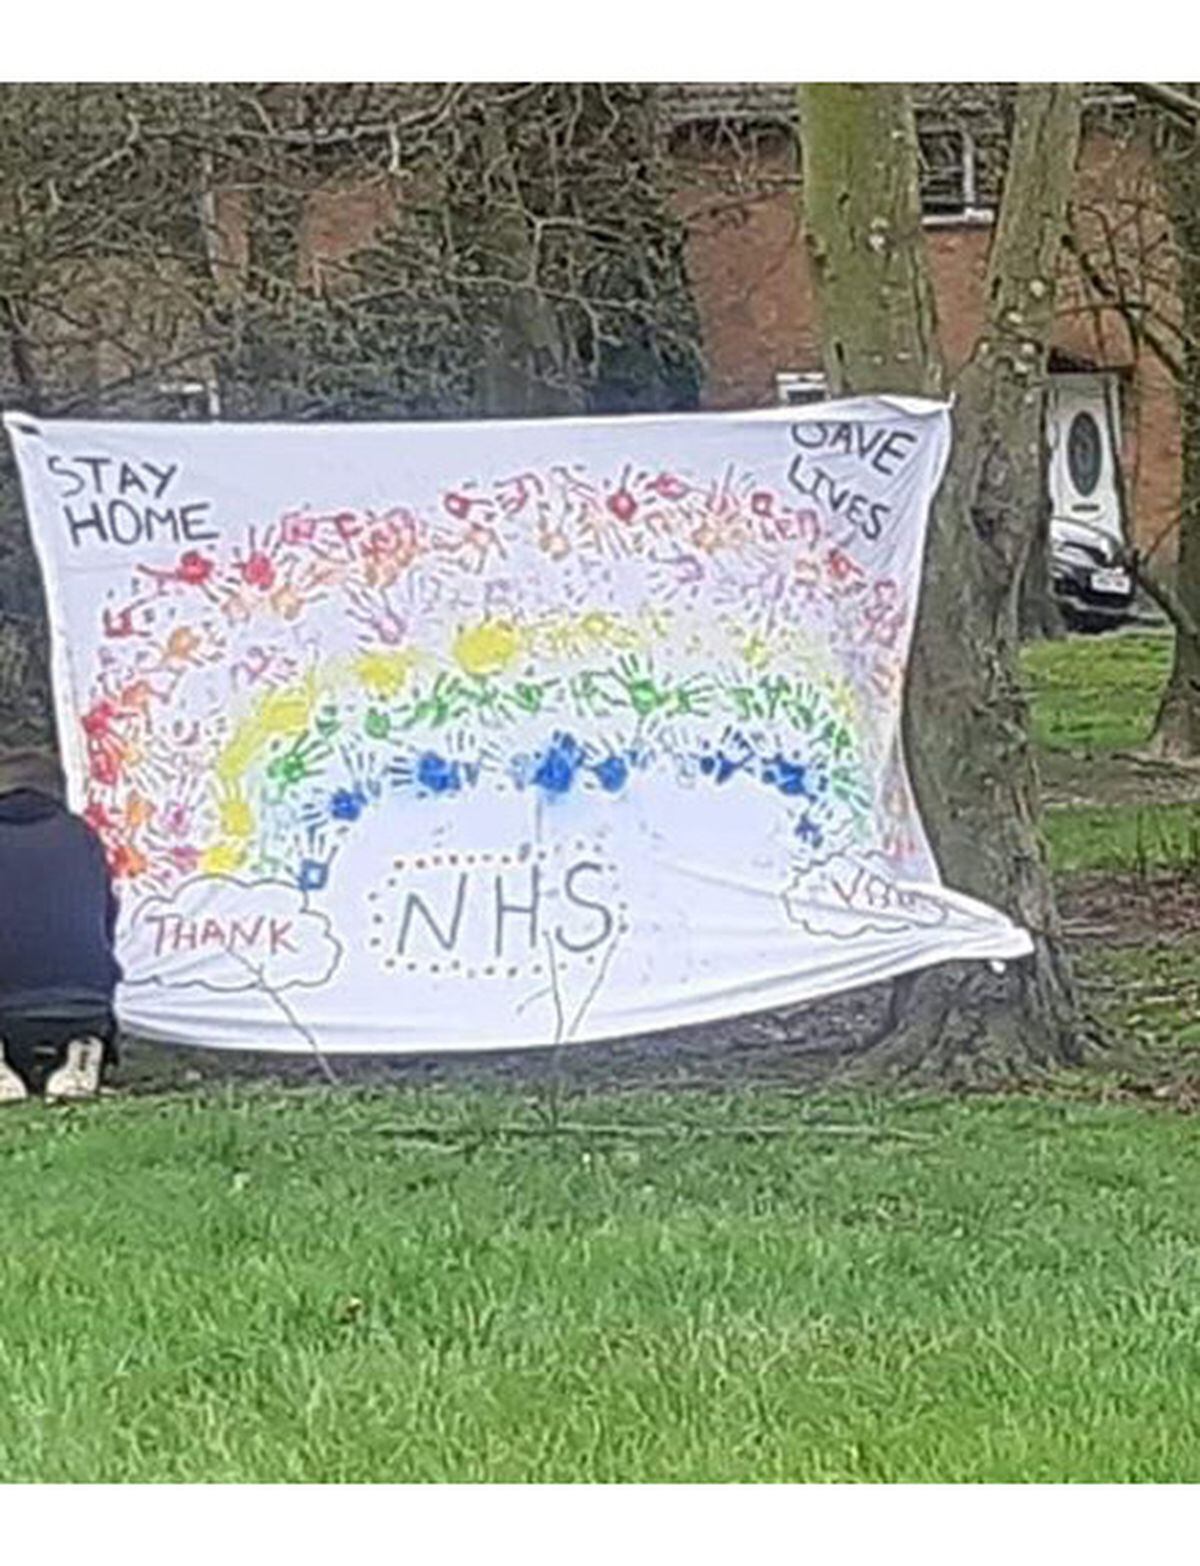 Jade Baker, her partner Mikey and their three children Freya, Finley and Amelia made this banner to put up in their street in Willenhall